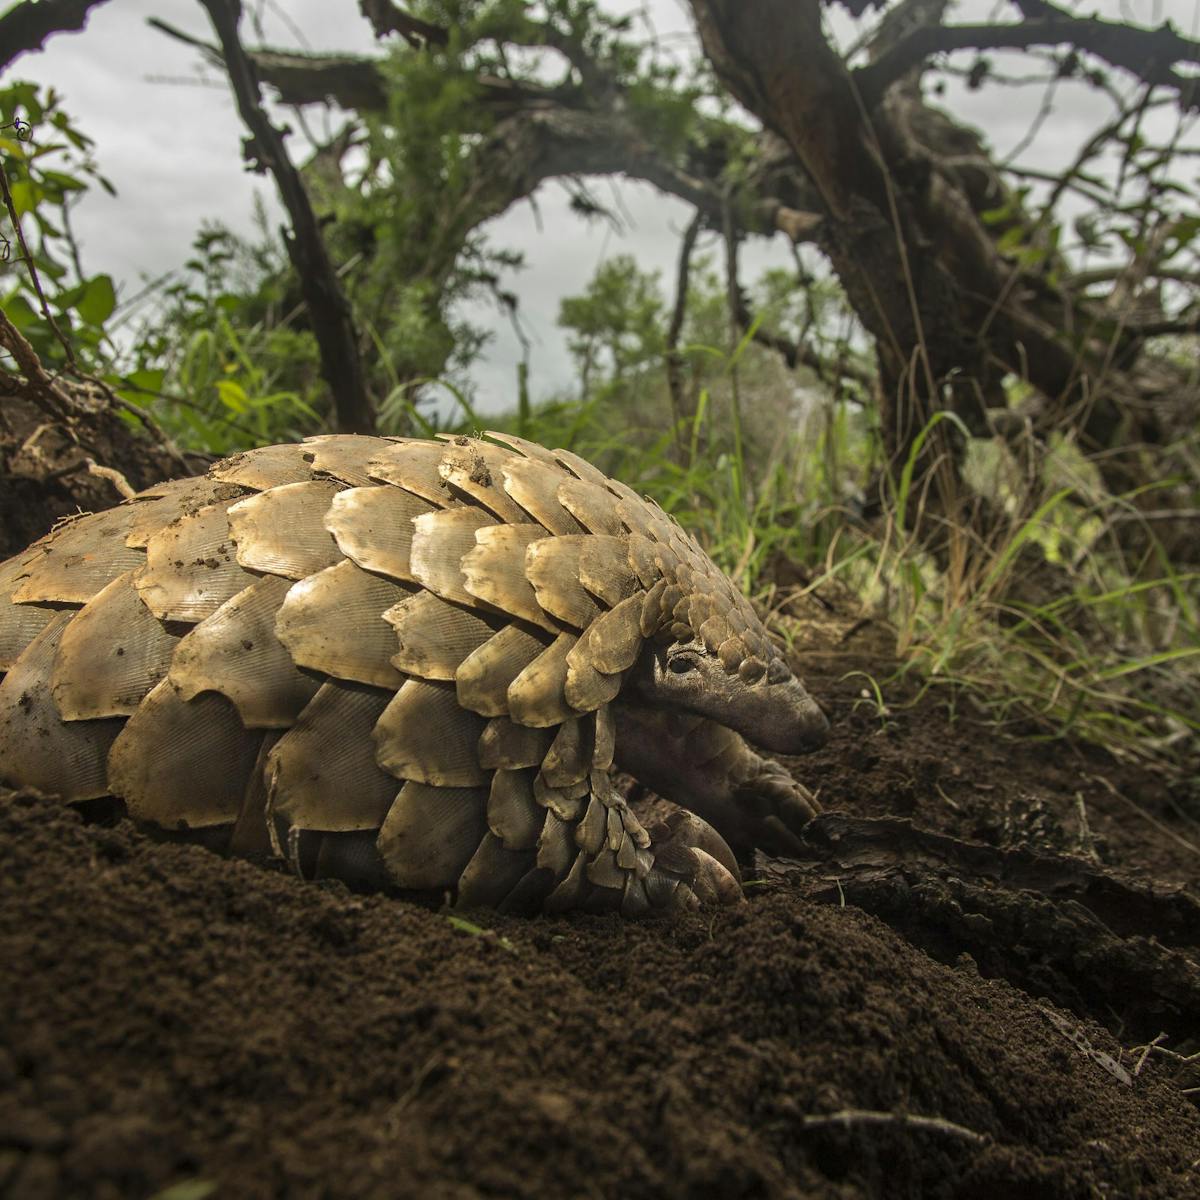 Back from extinction: a world first effort to return threatened pangolins  to the wild